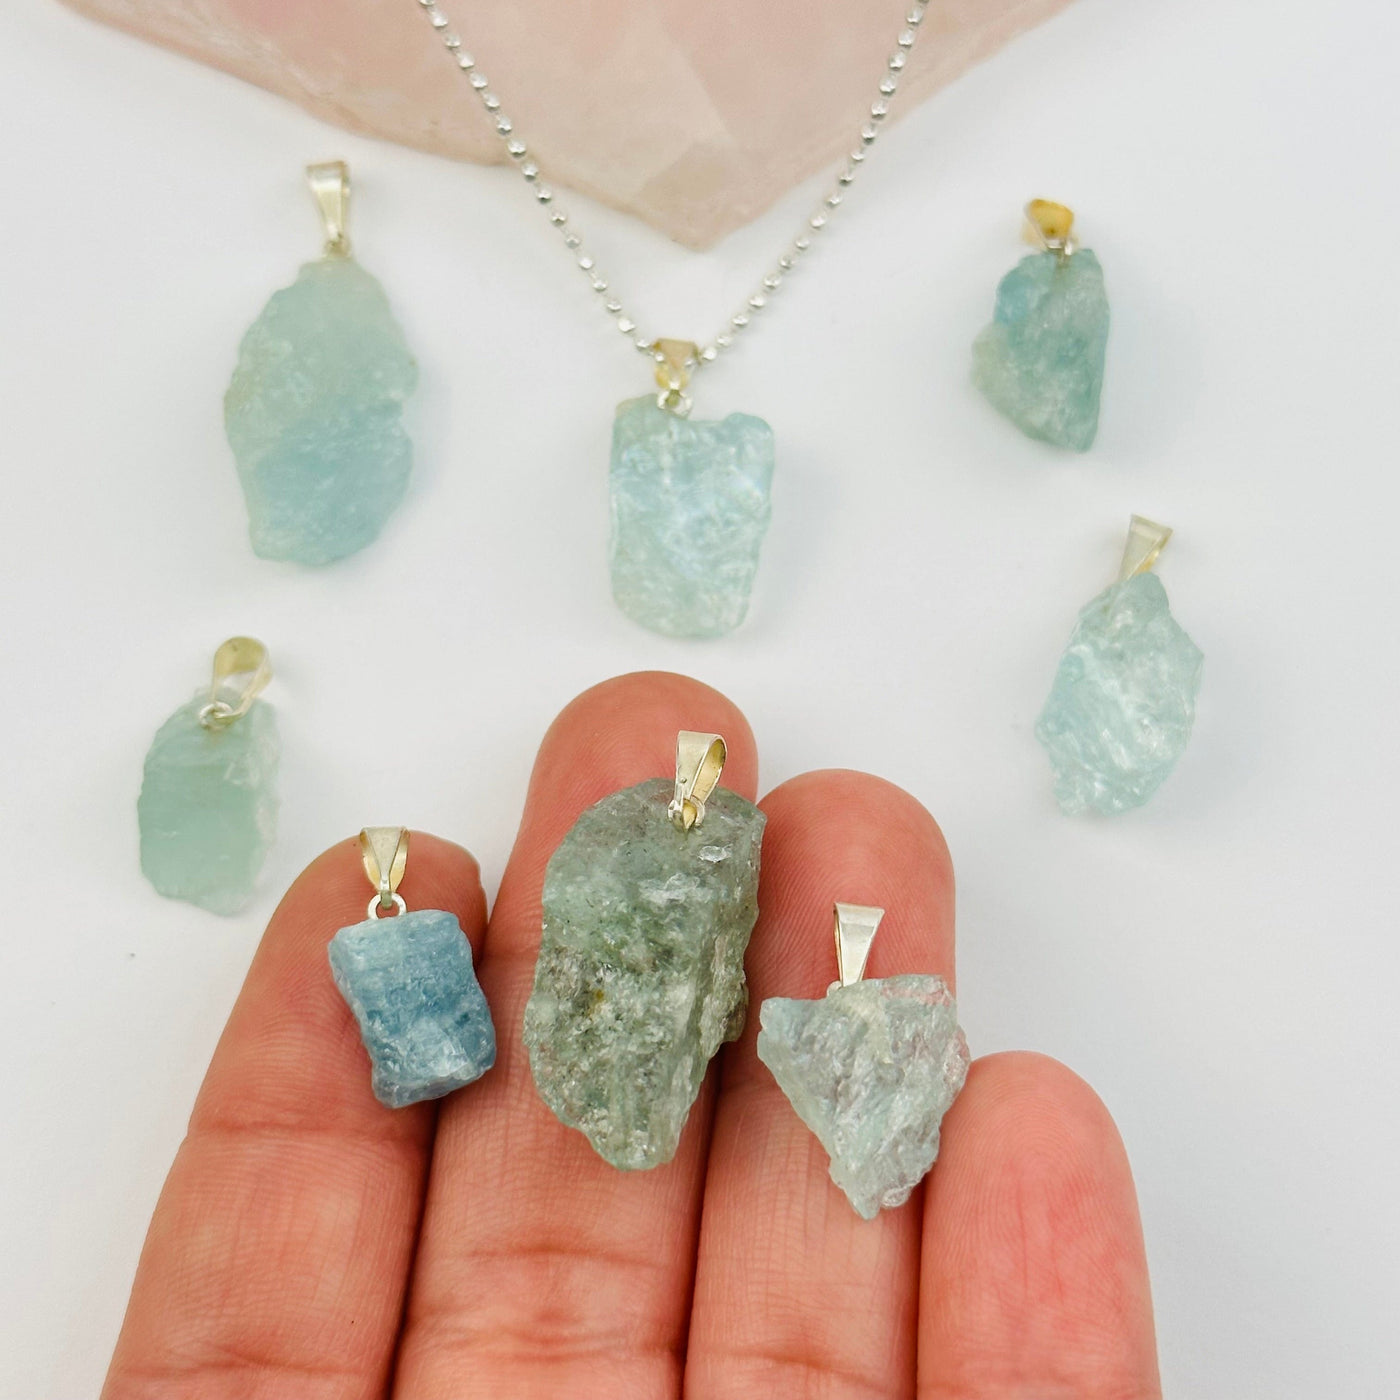 Rough Natural Crystal Stone Pendant - aquamarine - in hand for size reference